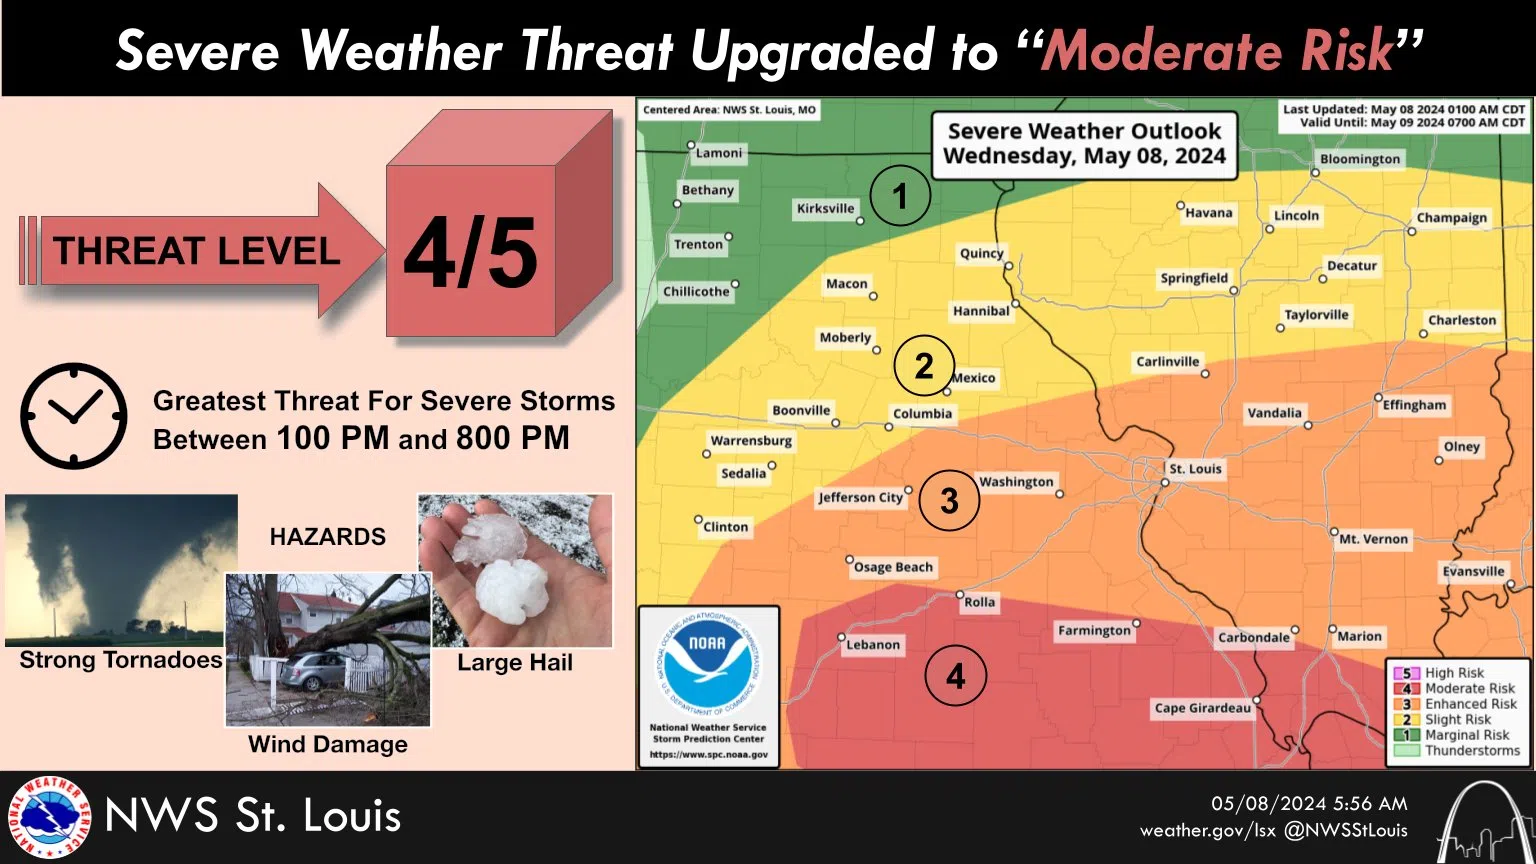 Severe Thunderstorms Today--Potential for "Significant" or "Destructive" Storms